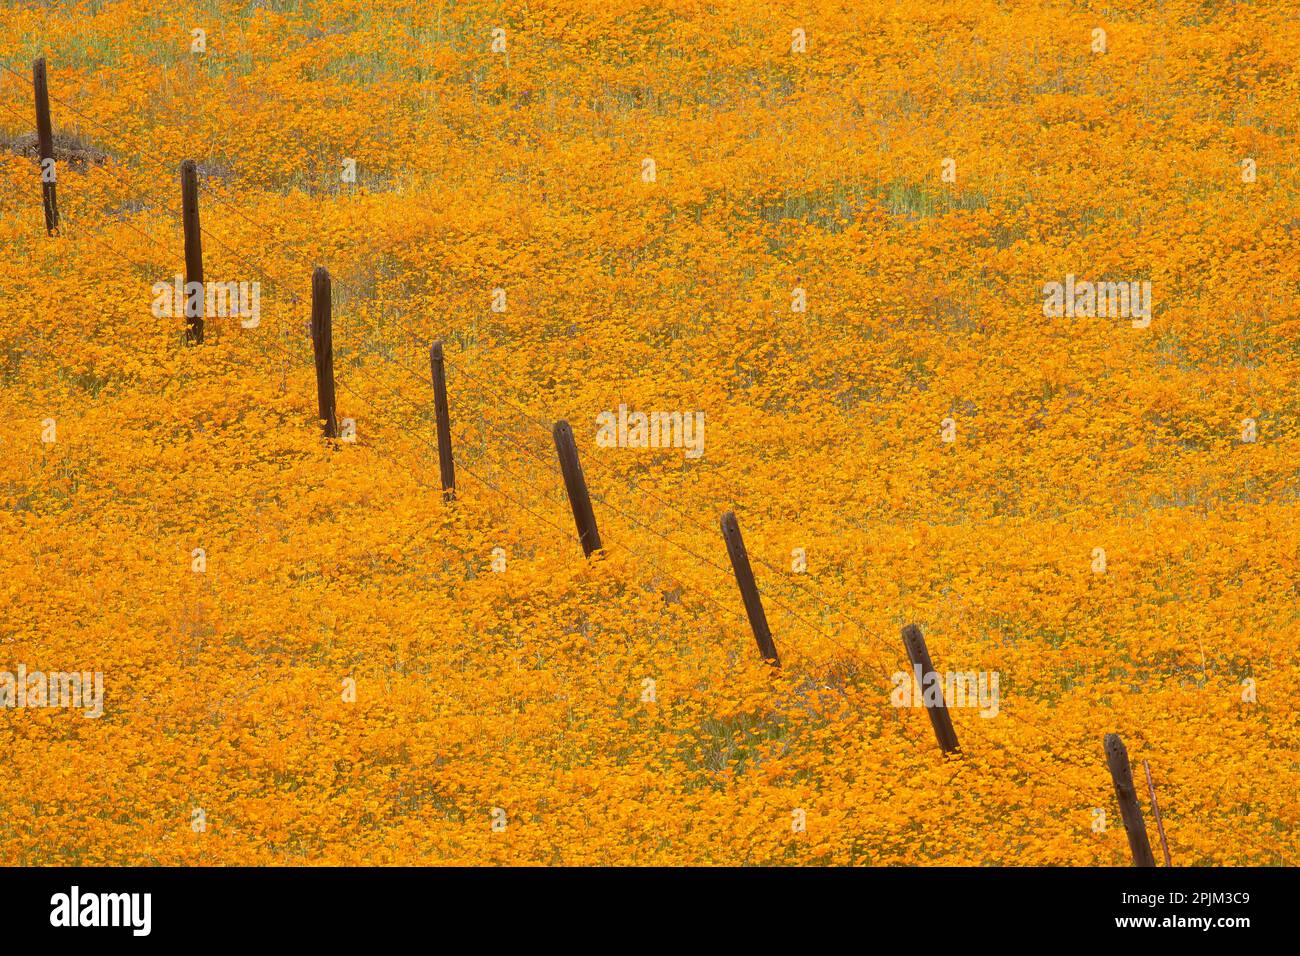 California poppies blooming in a field in Amador County. Stock Photo